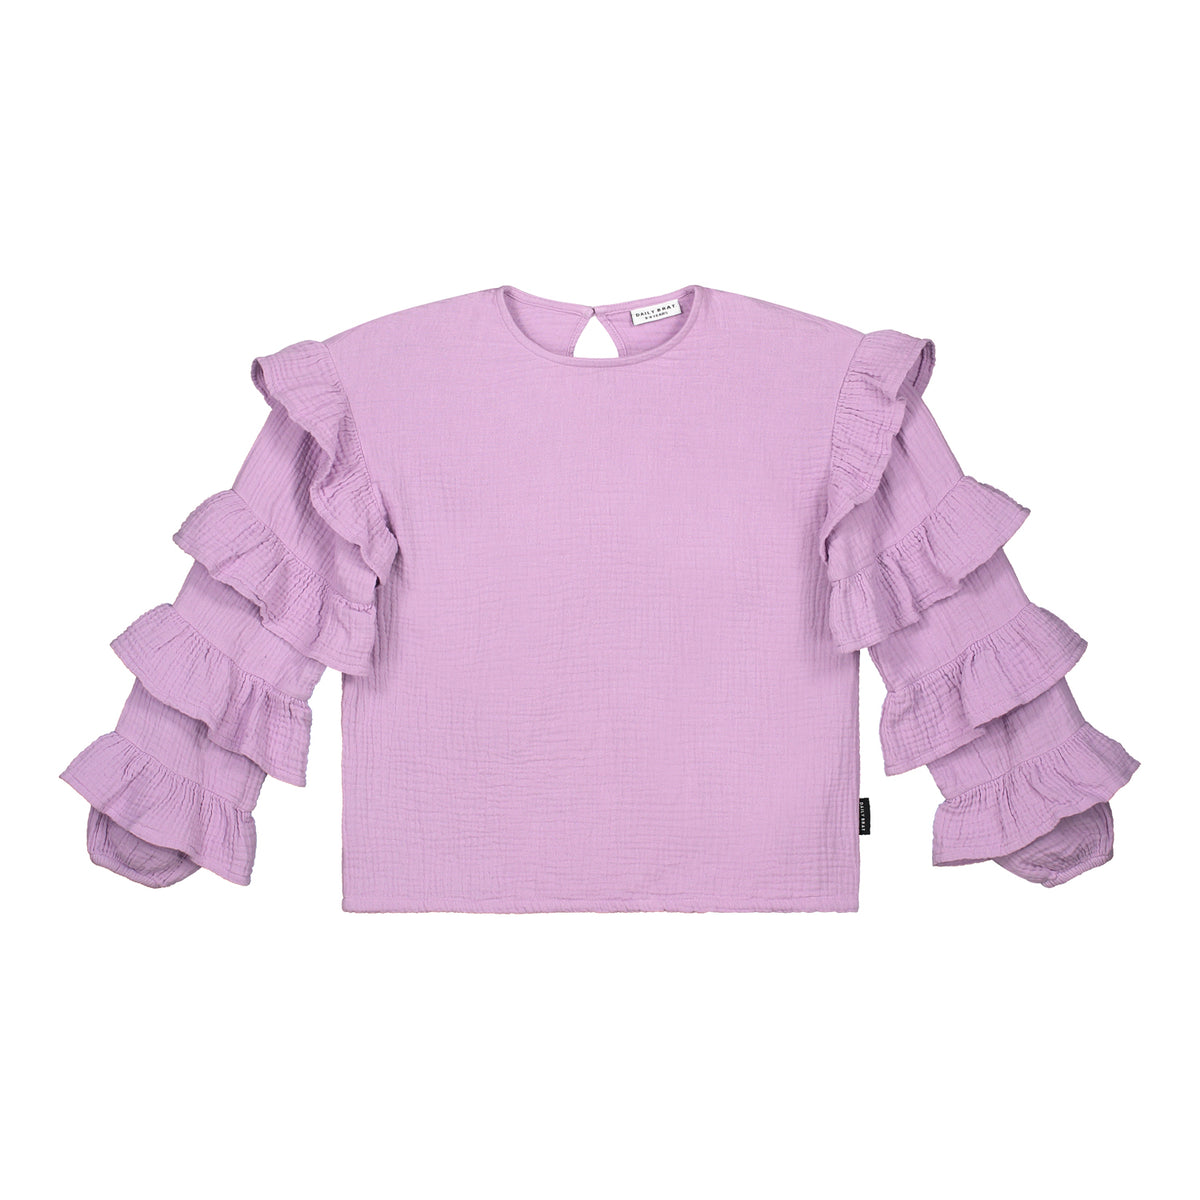 Lolly pop ruffle top lavender herb Daily Brat